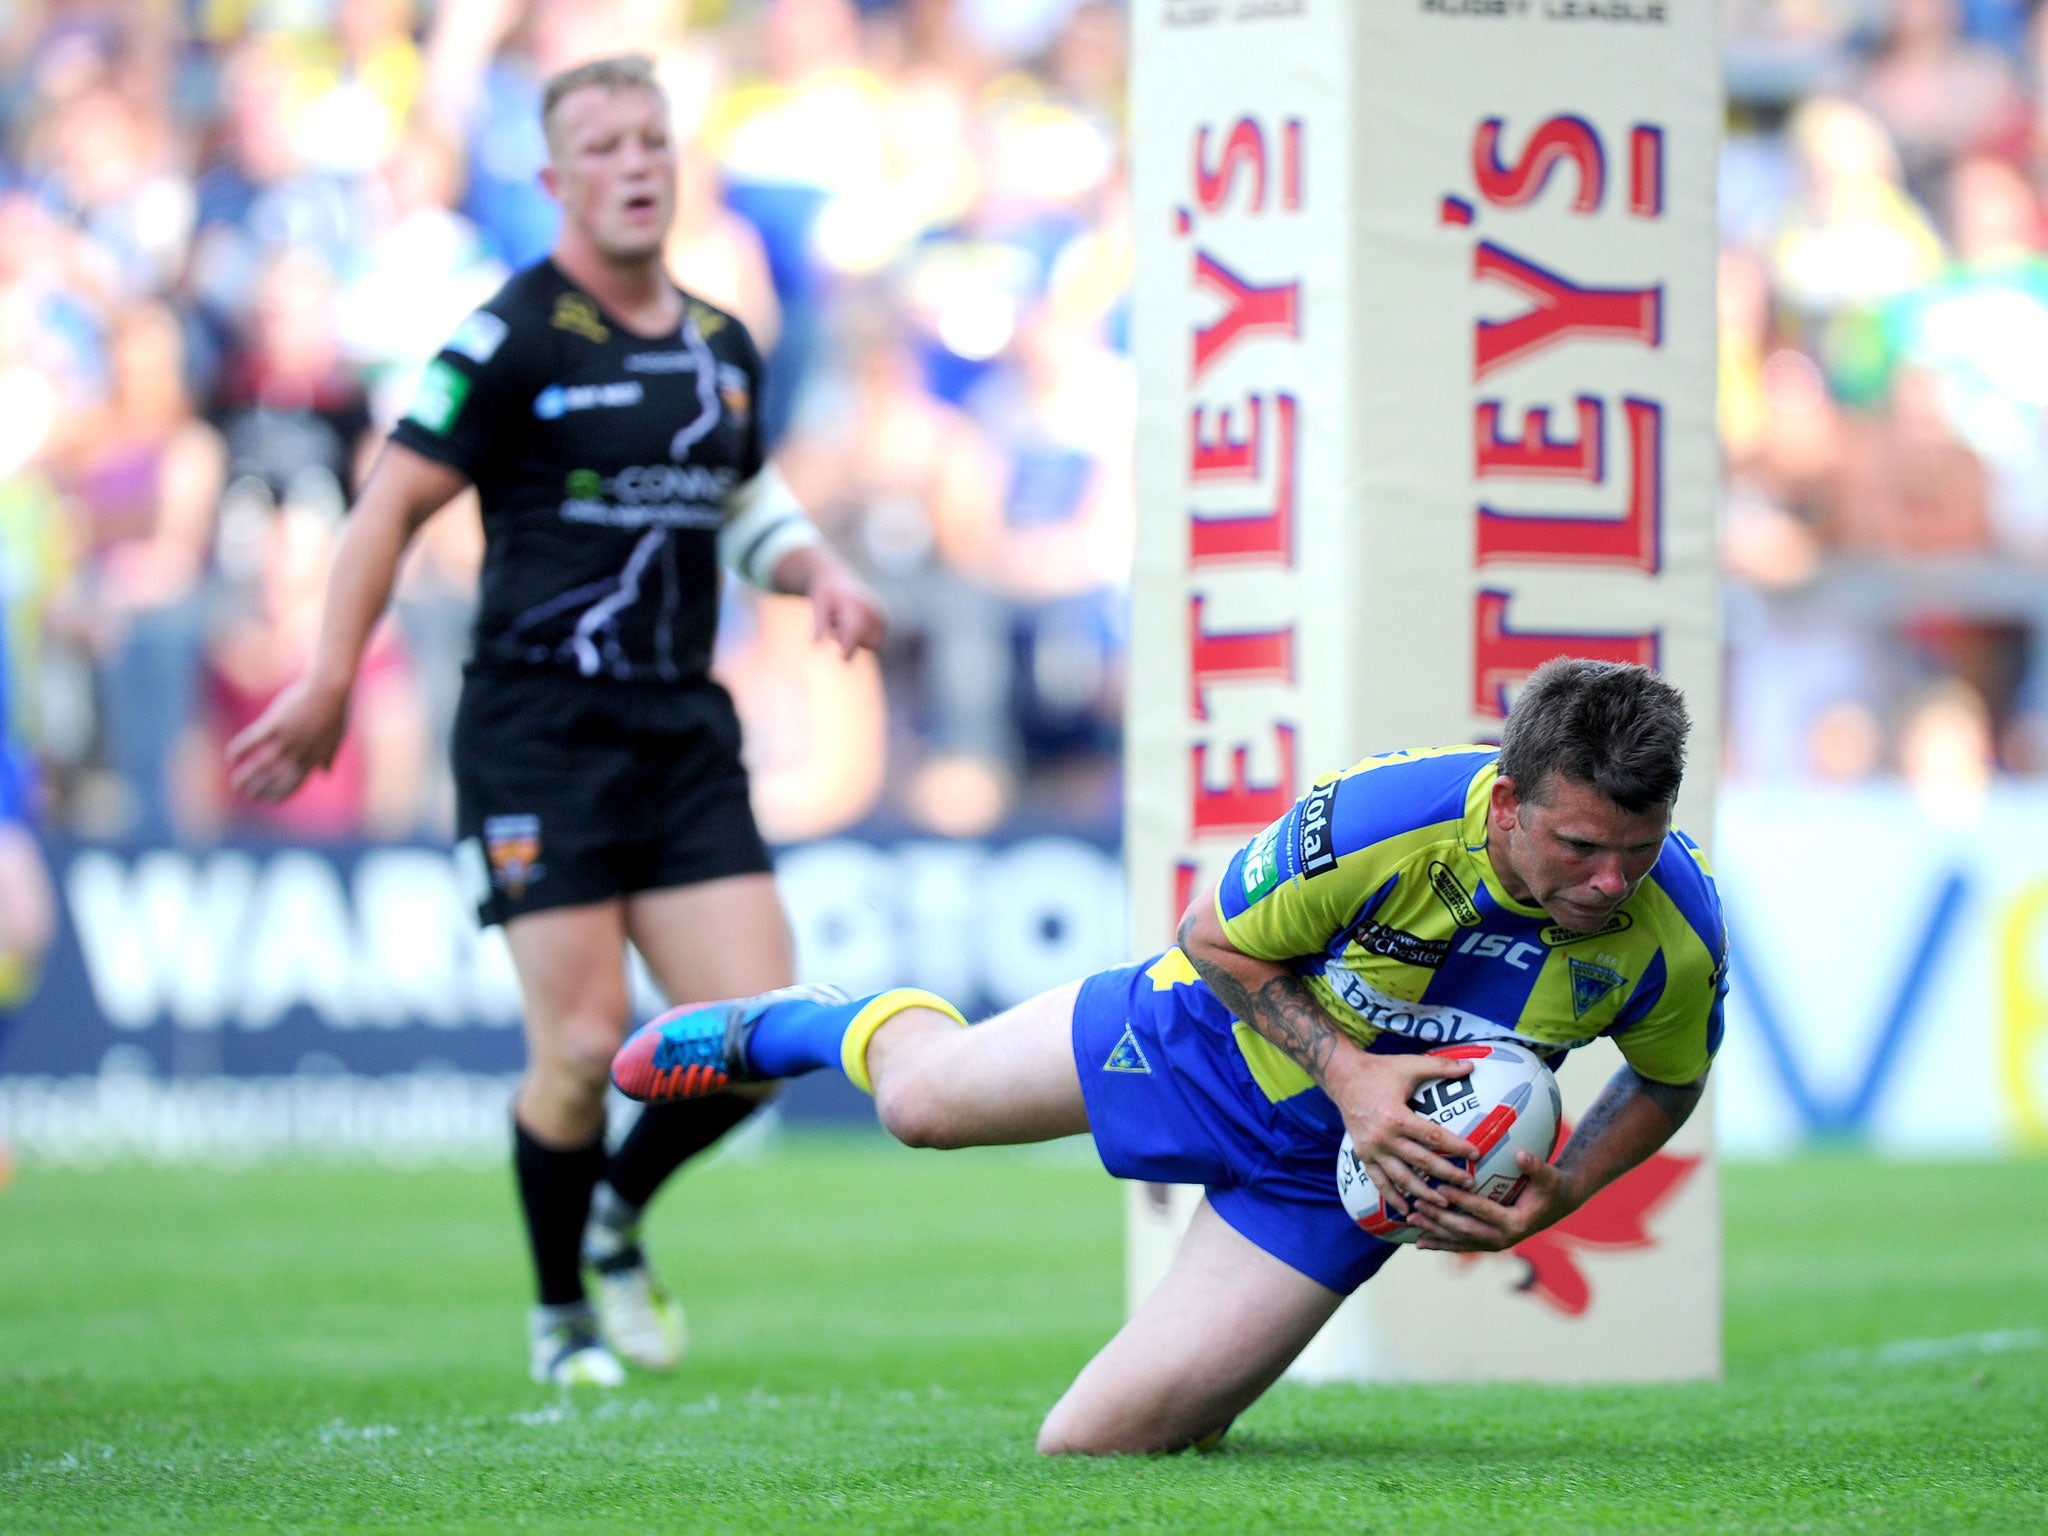 Warrington’s Lee Briers goes over for a try against Huddersfield